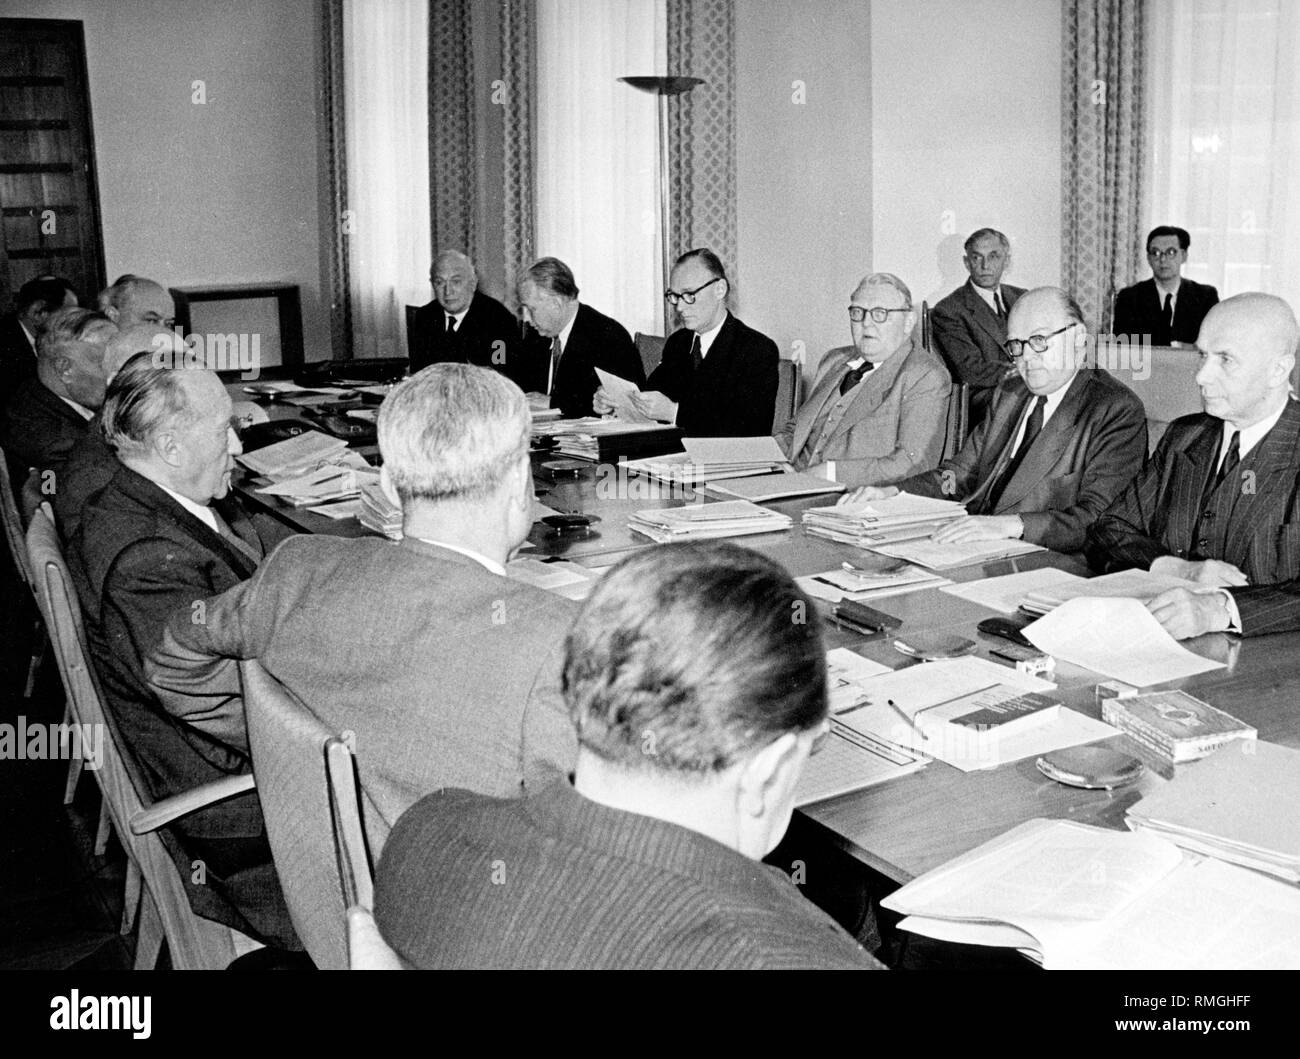 This Photo Shows A Cabinet Meeting Of The Government Pictured